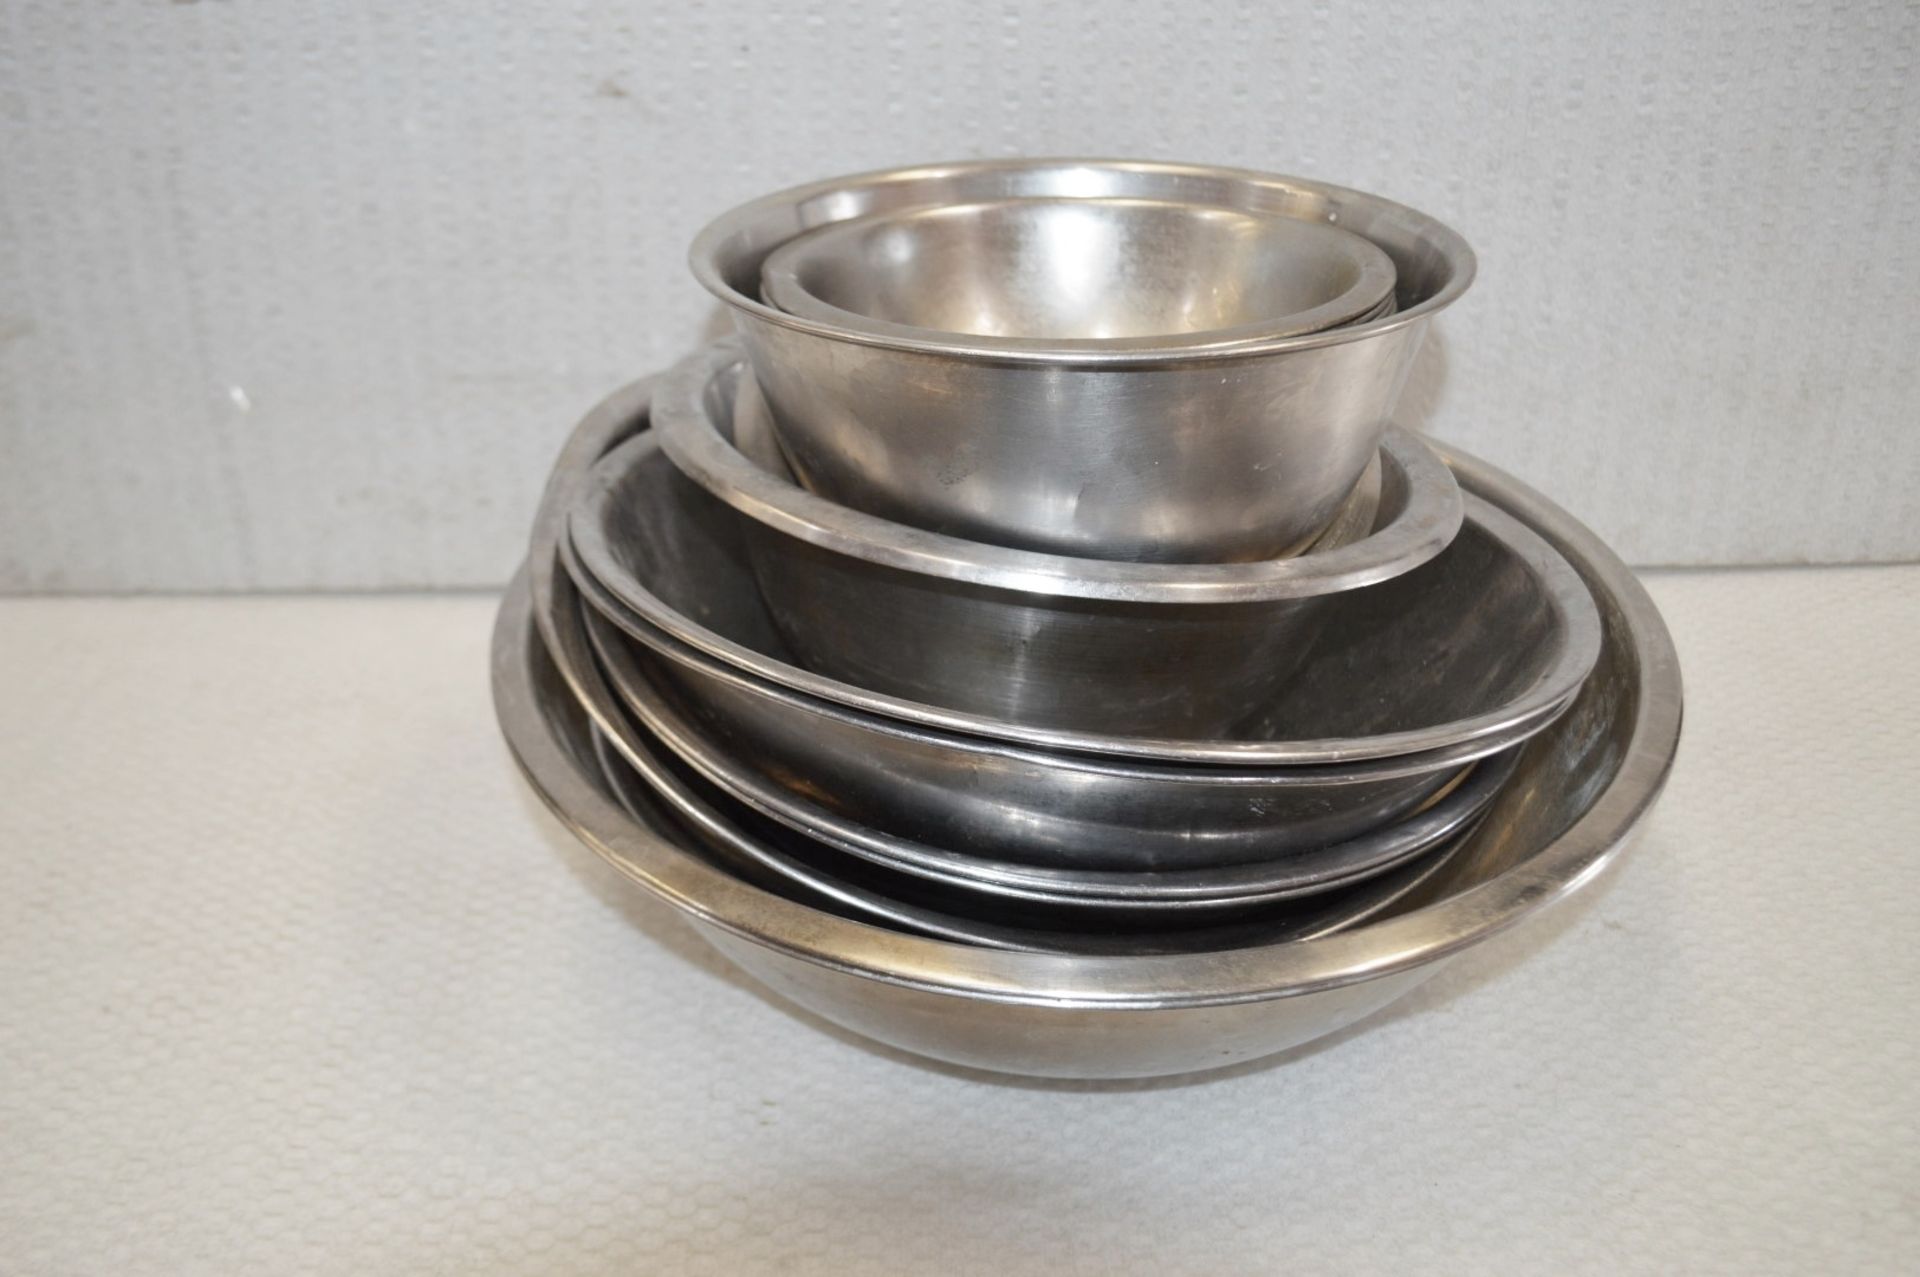 21 x Various Stainless Steel Chefs Mixing/Prep Bowls - Various Sizes Included - Recently Removed - Image 3 of 3